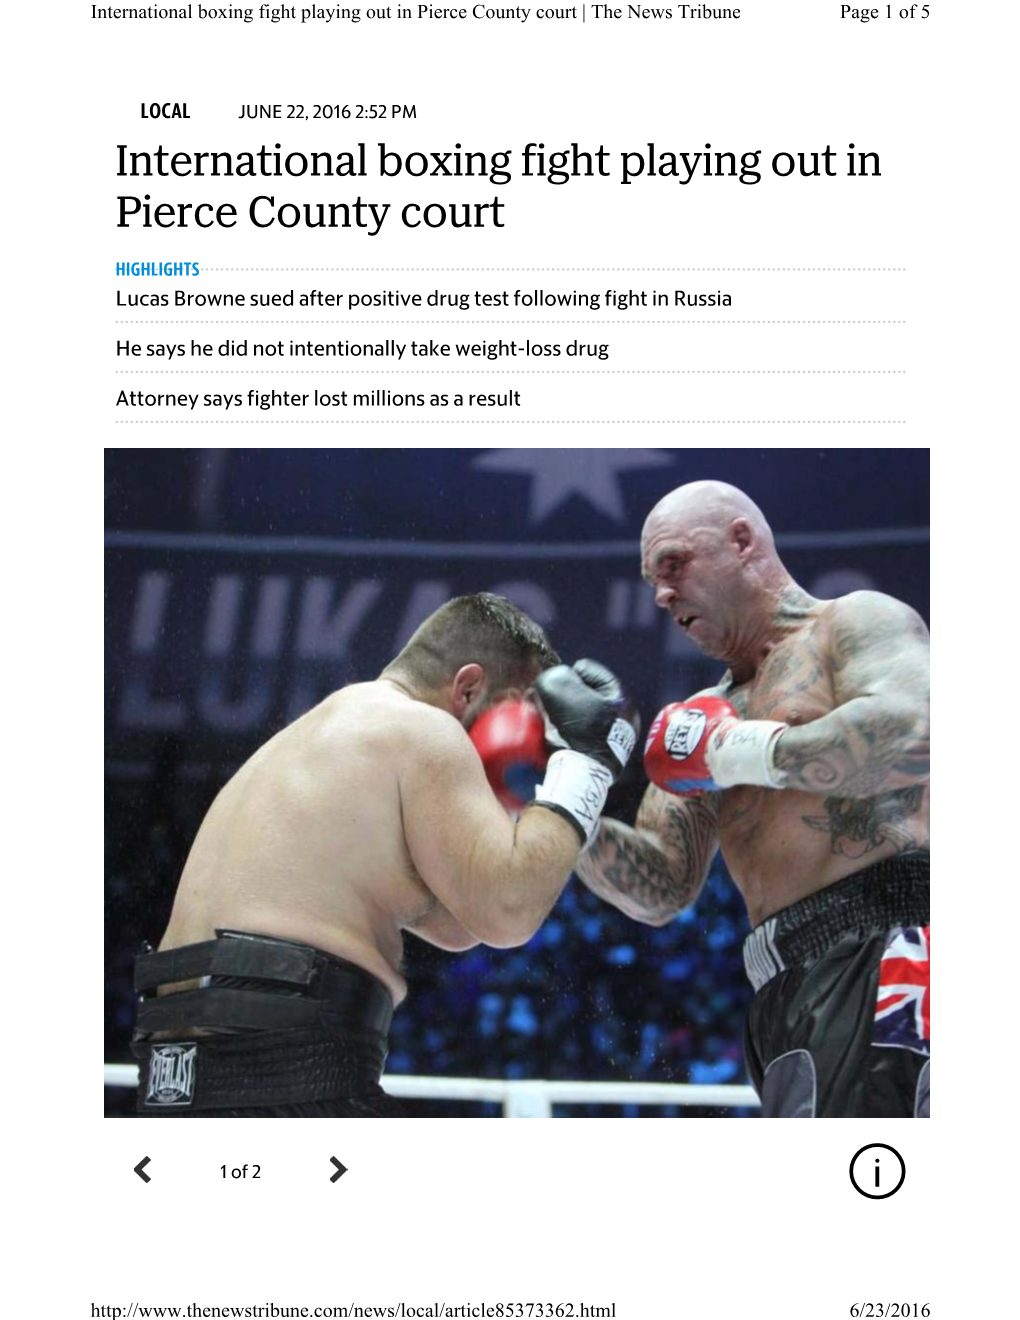 International Boxing Fight Playing out in Pierce County Court | the News Tribune Page 1 of 5